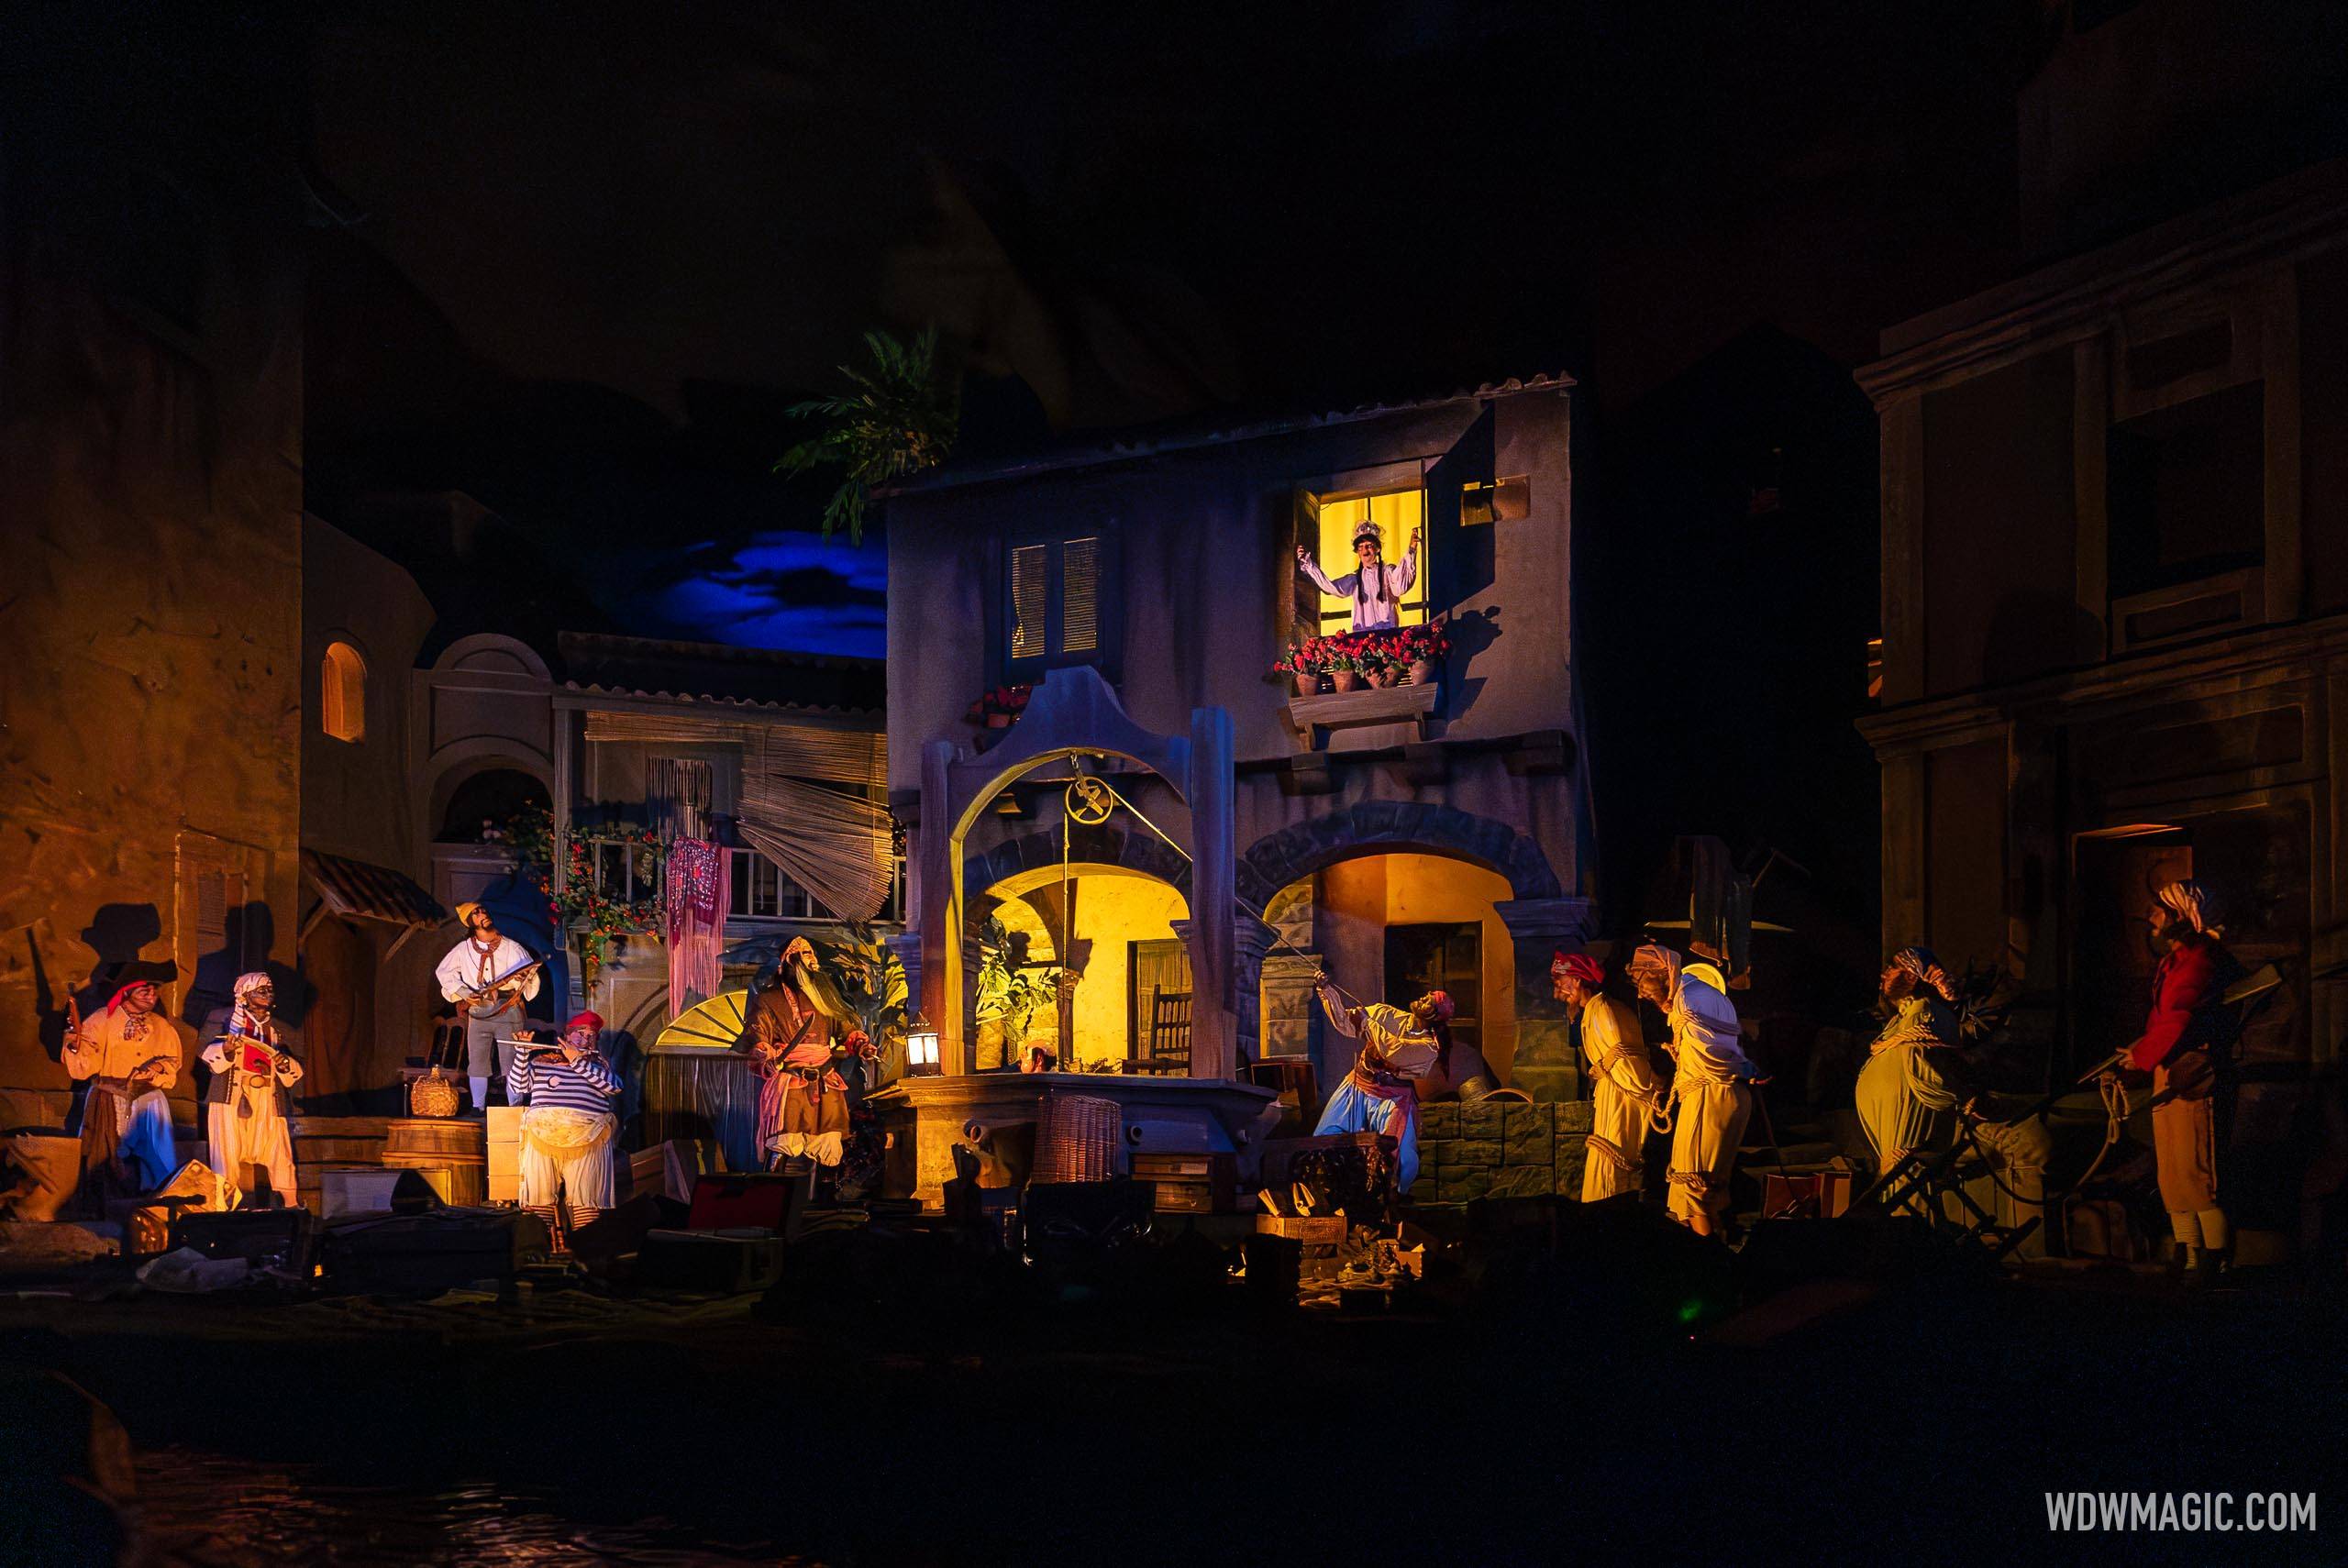 New Pirates of the Caribbean entertainment